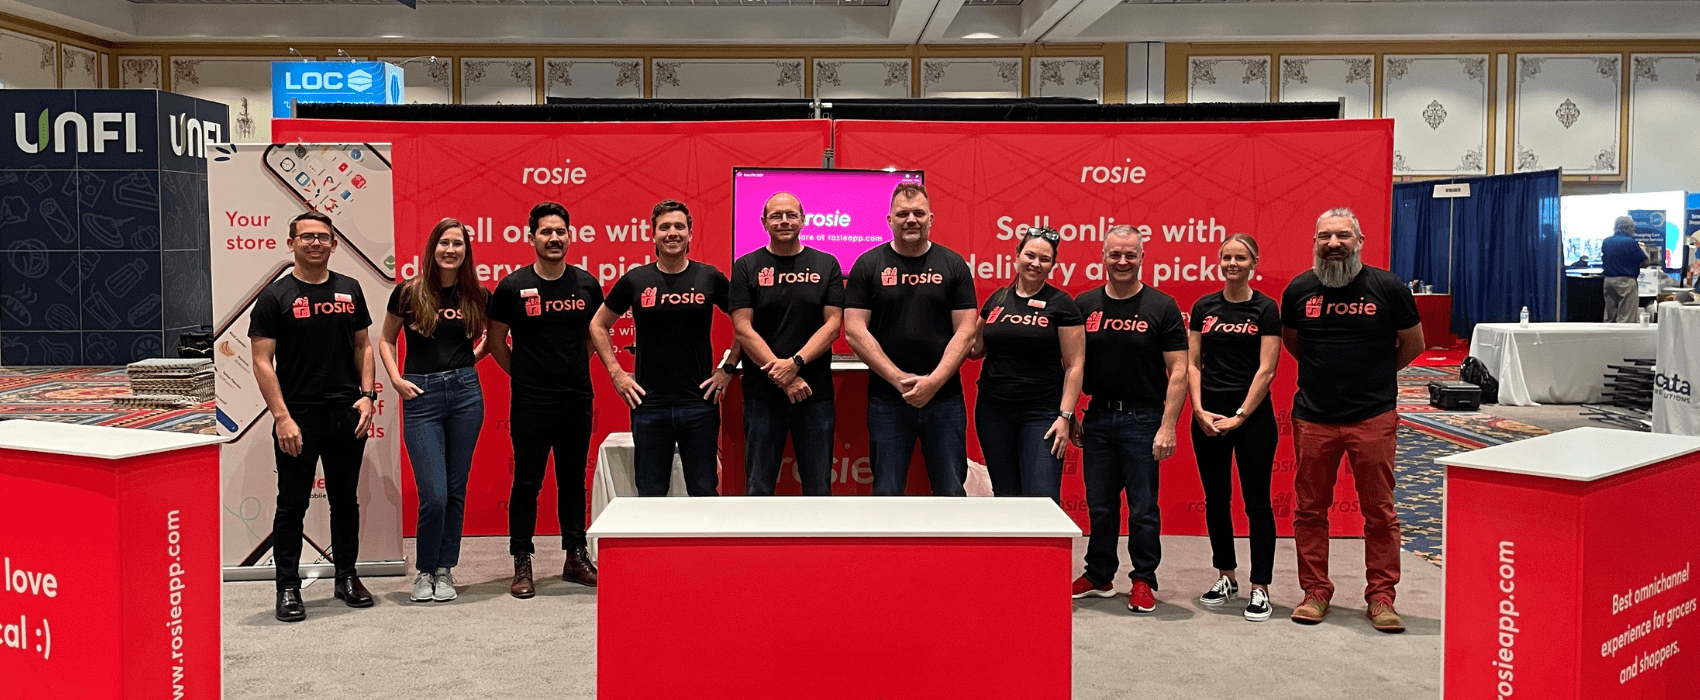 Rosie team members smiling in the Rosie booth at the NGA Show 2021